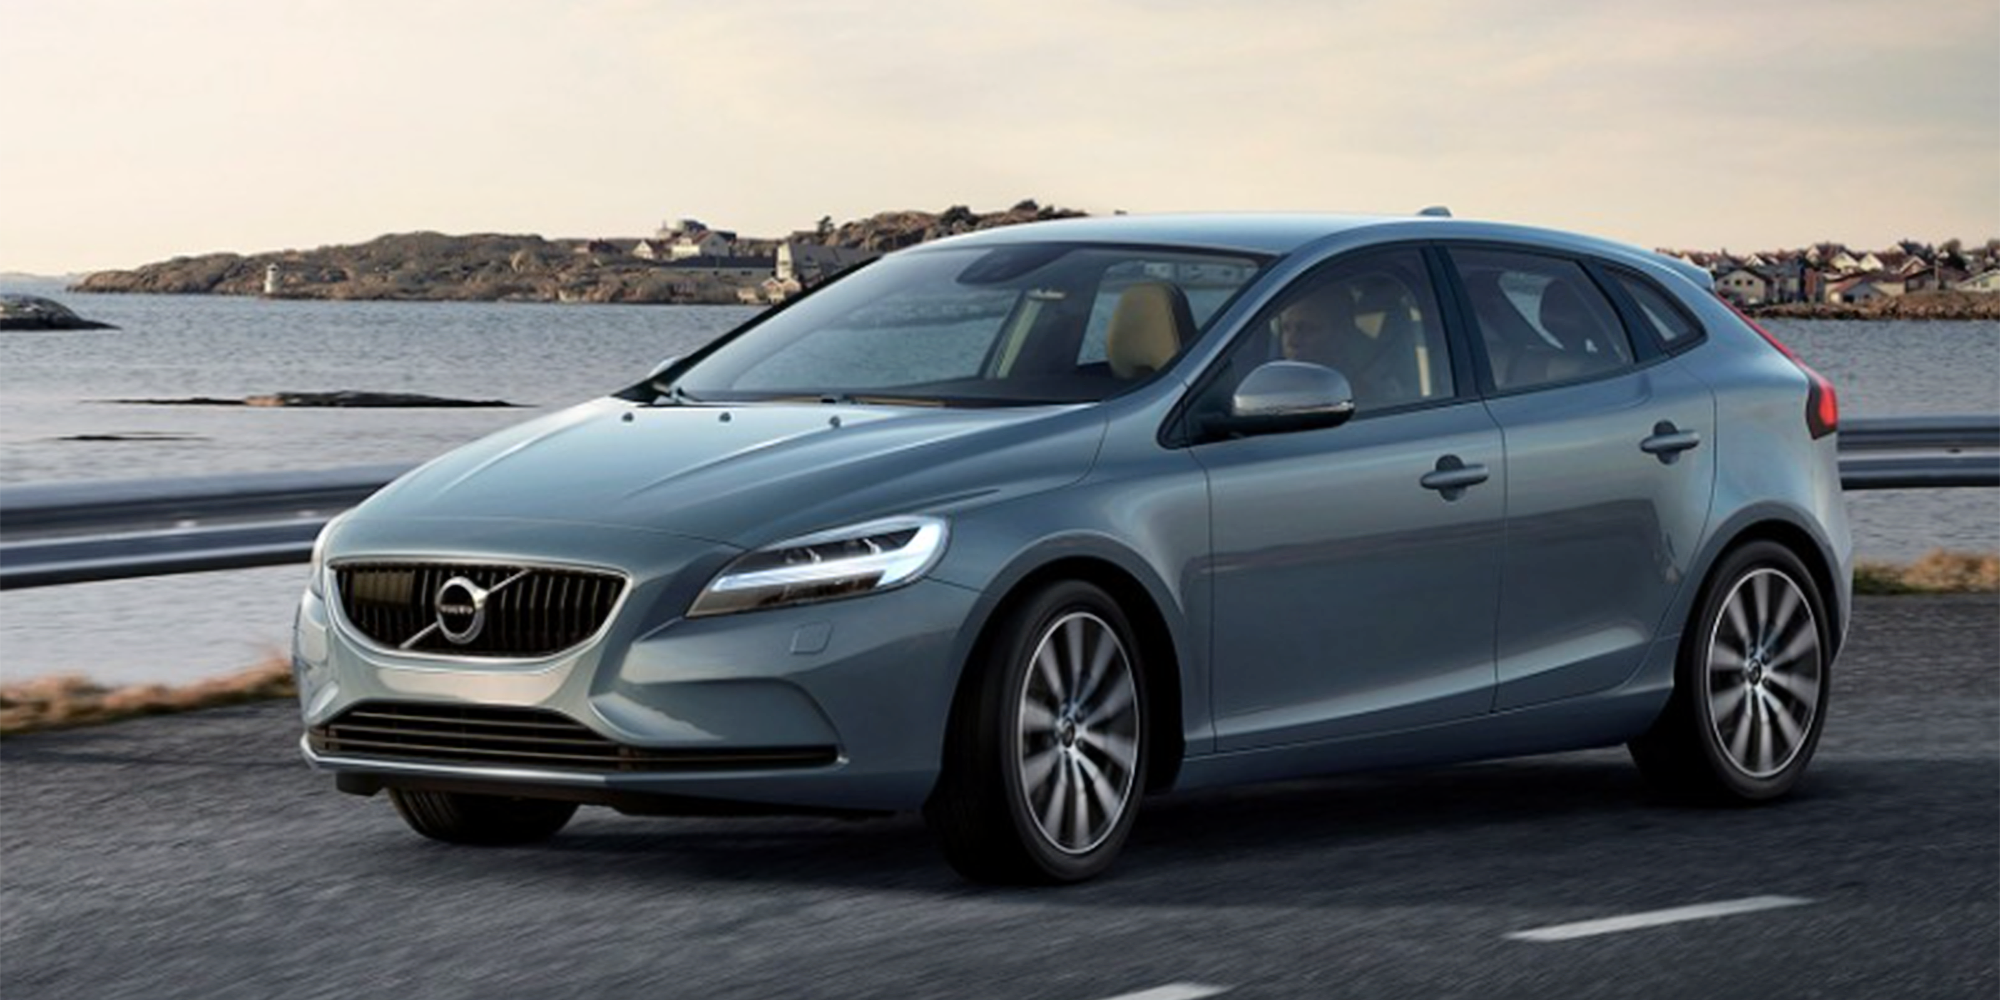 Amazing Volvo V40 Pictures & Backgrounds